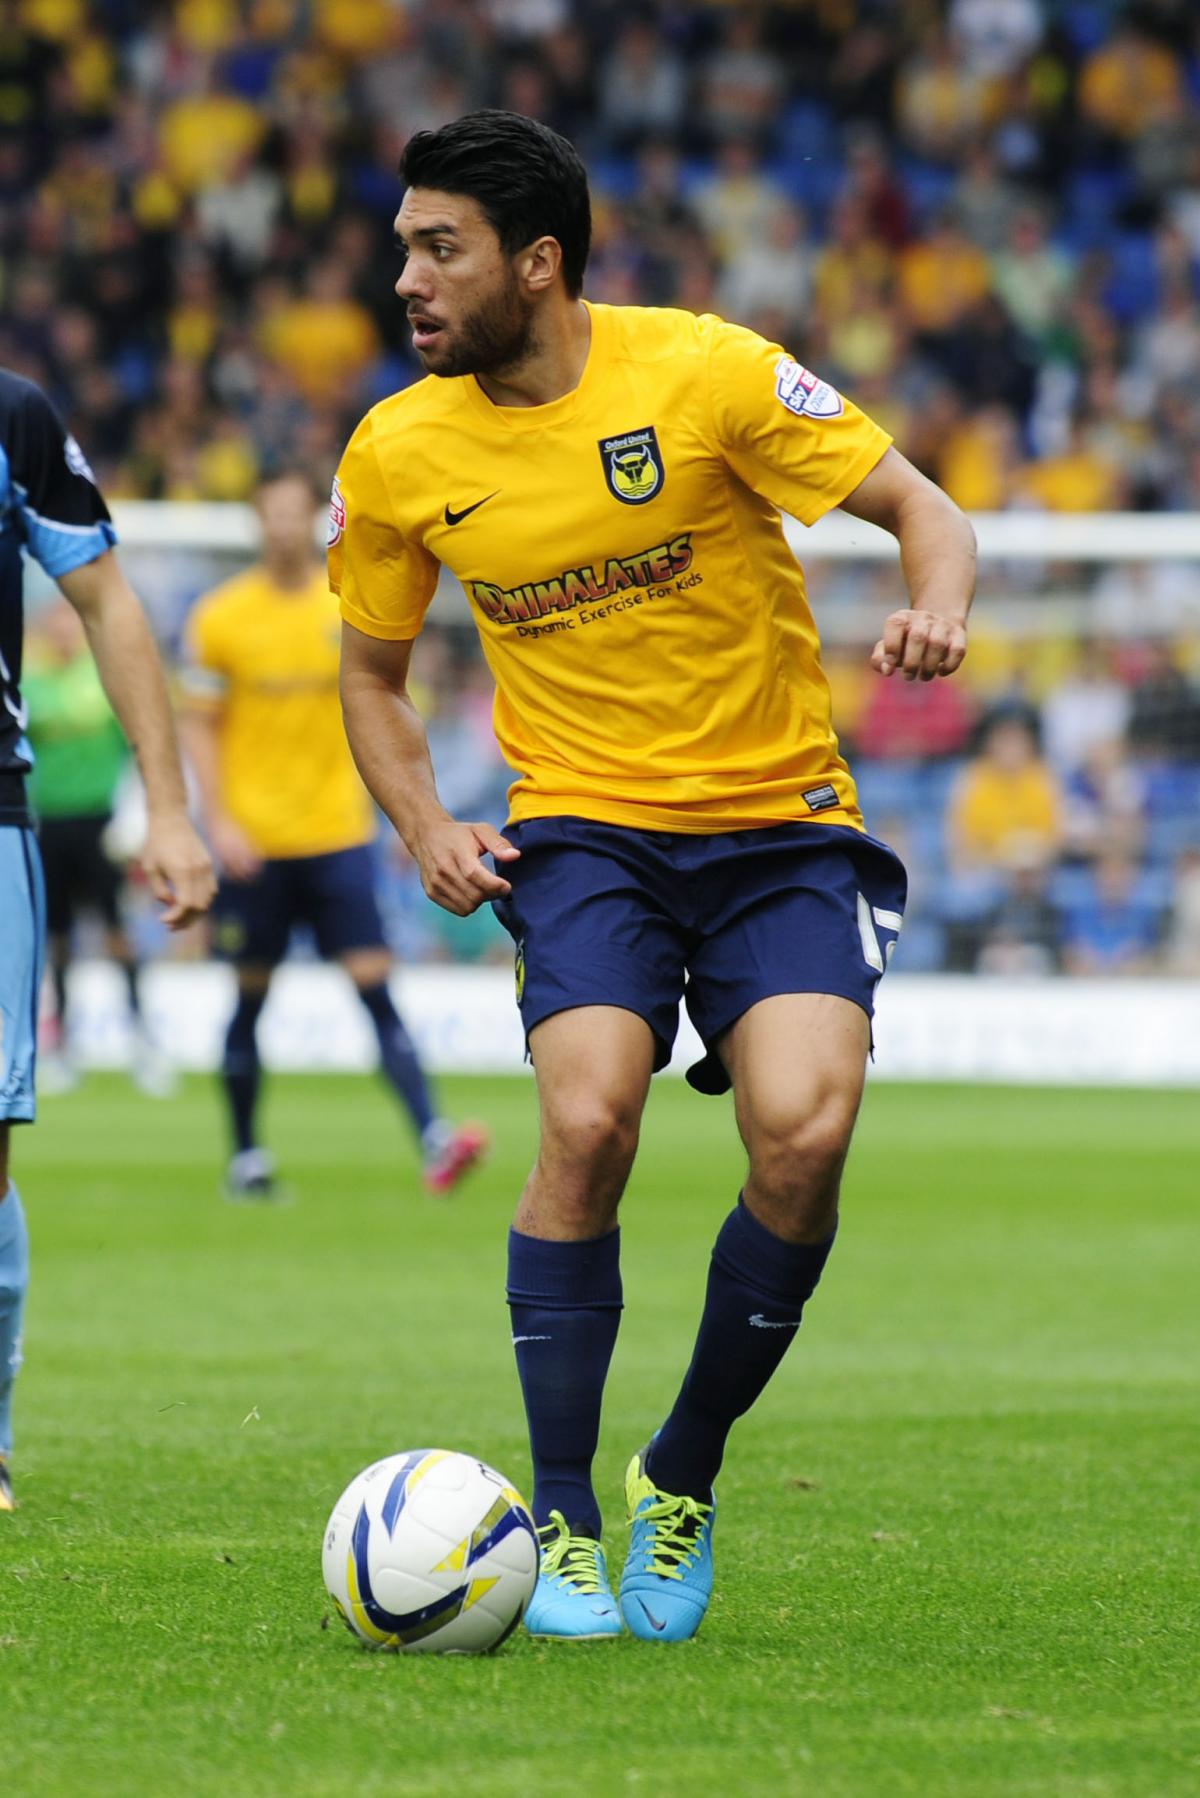 Pictures from the Saturday 24th August game at Kassam Stadium